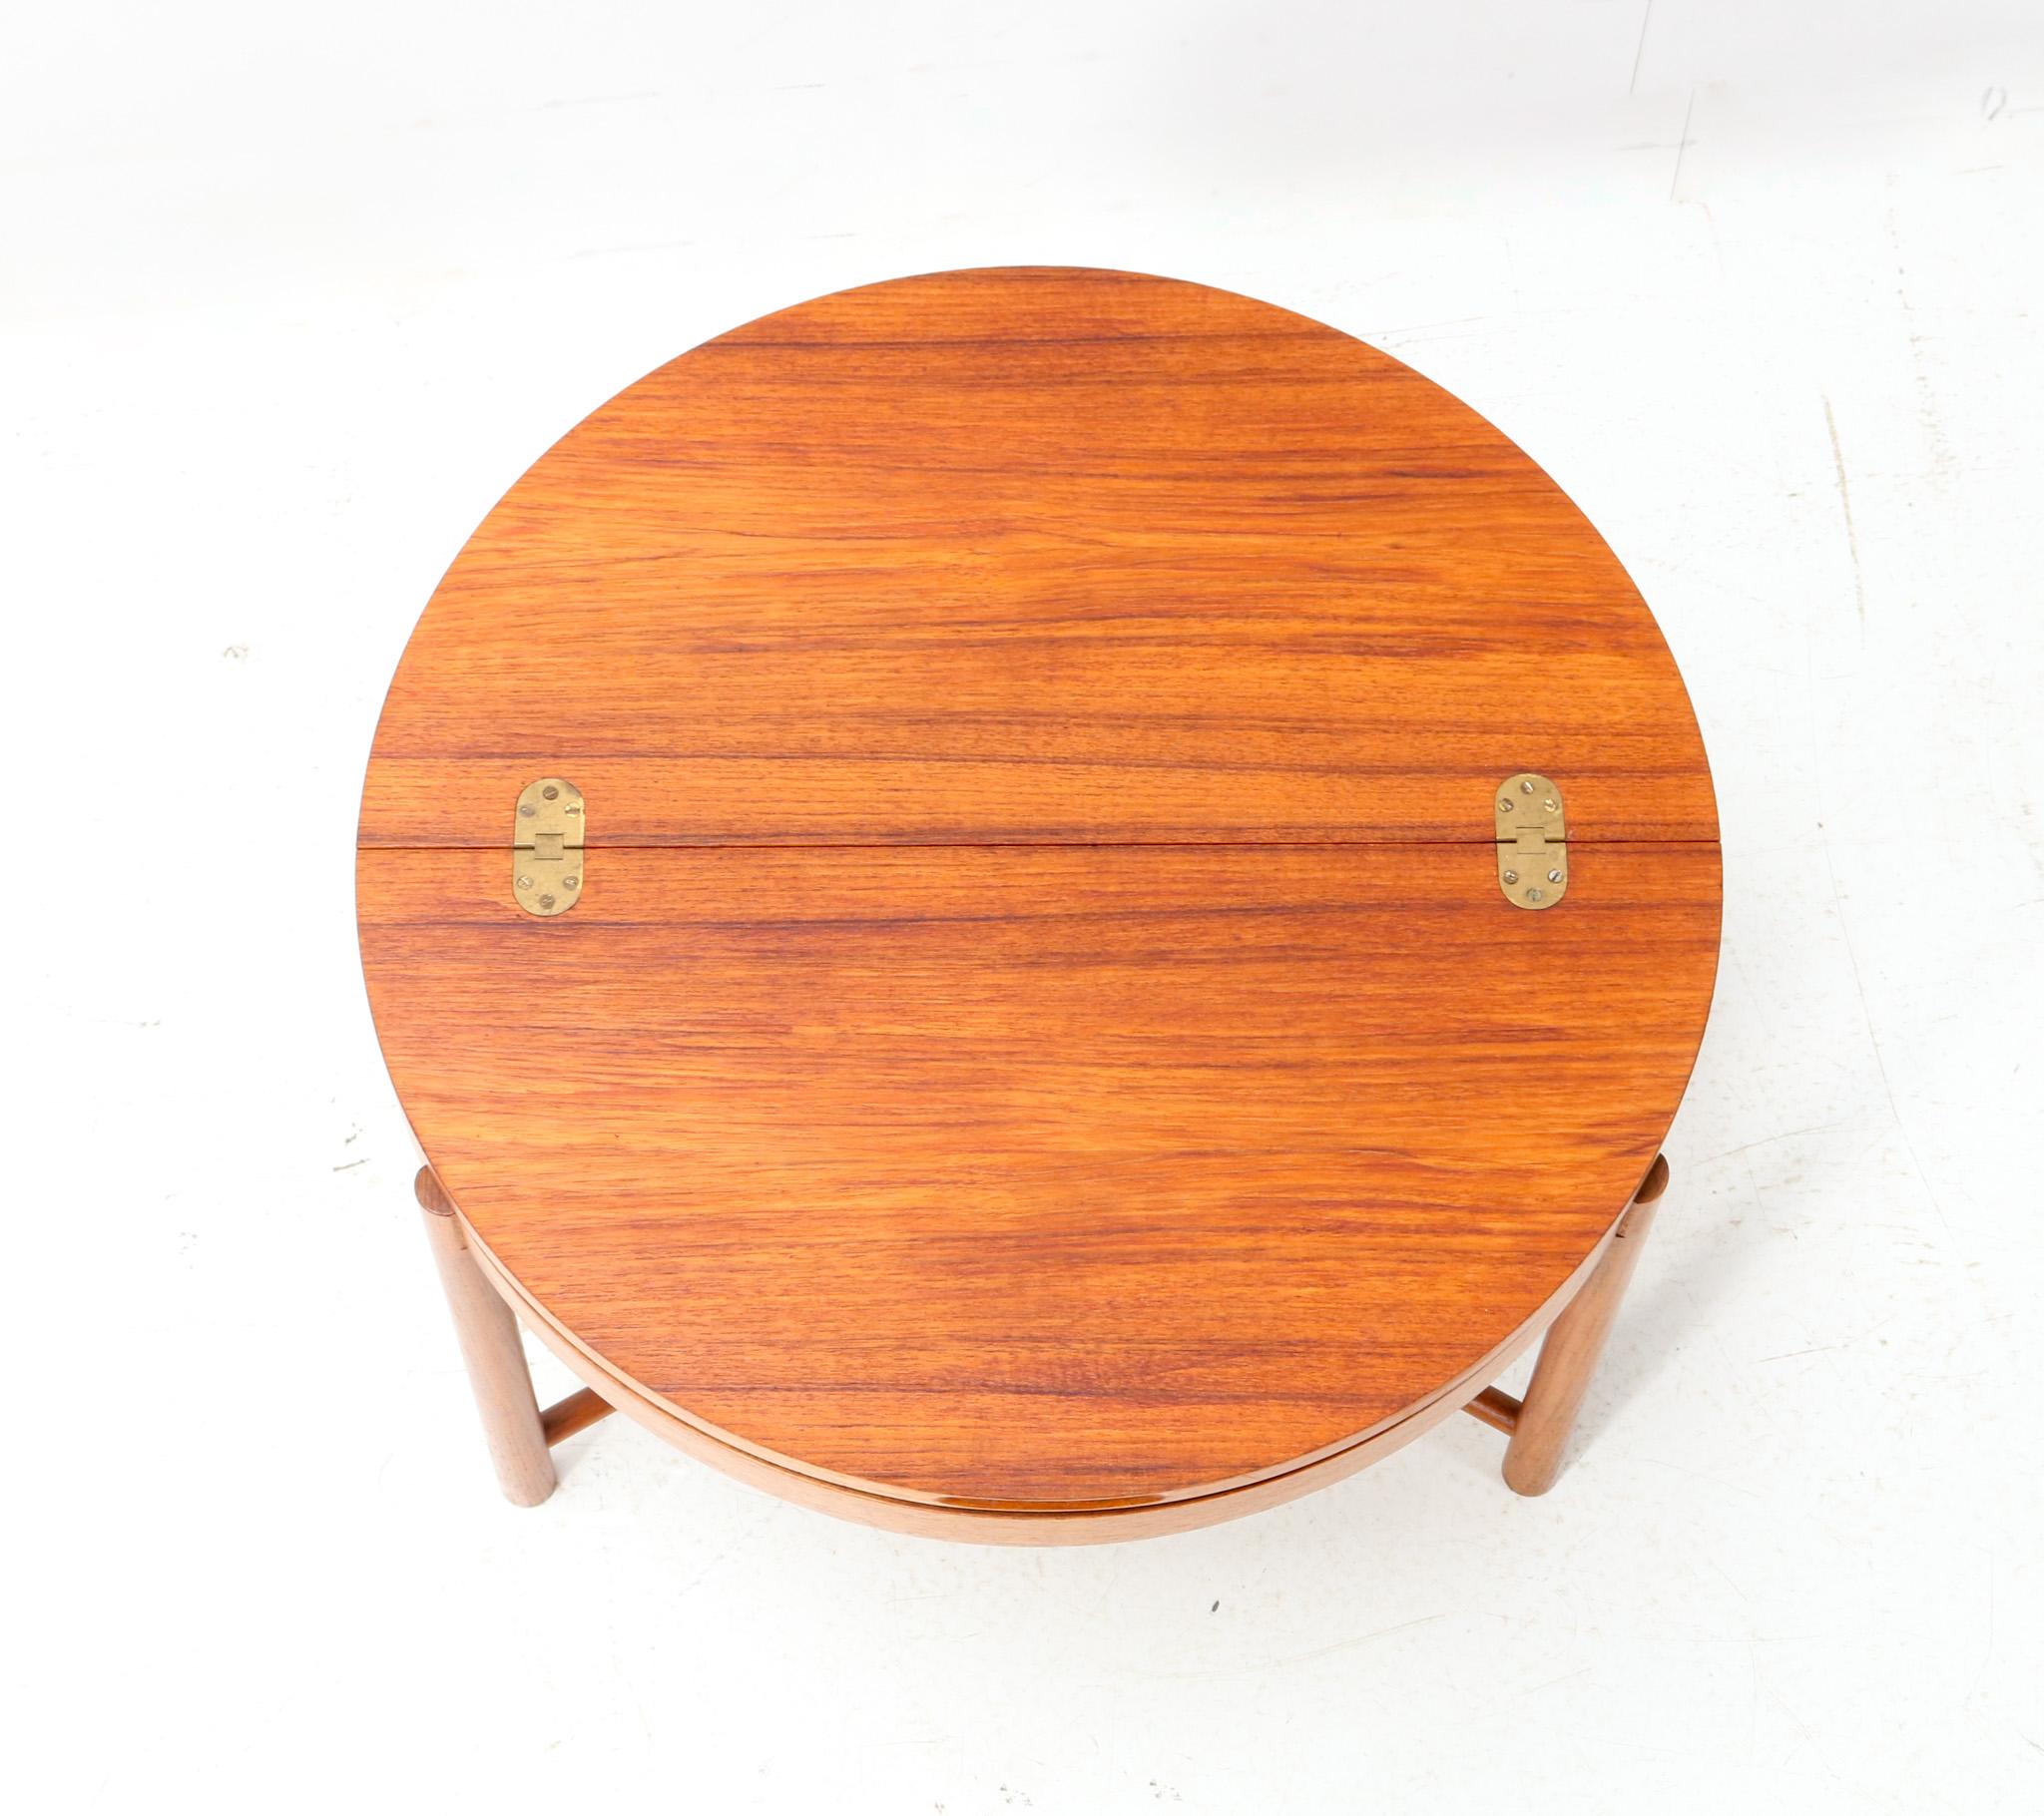  Mid-Century Modern Teak Sewing Table by Rastad & Relling for Rasmus Solberg For Sale 2